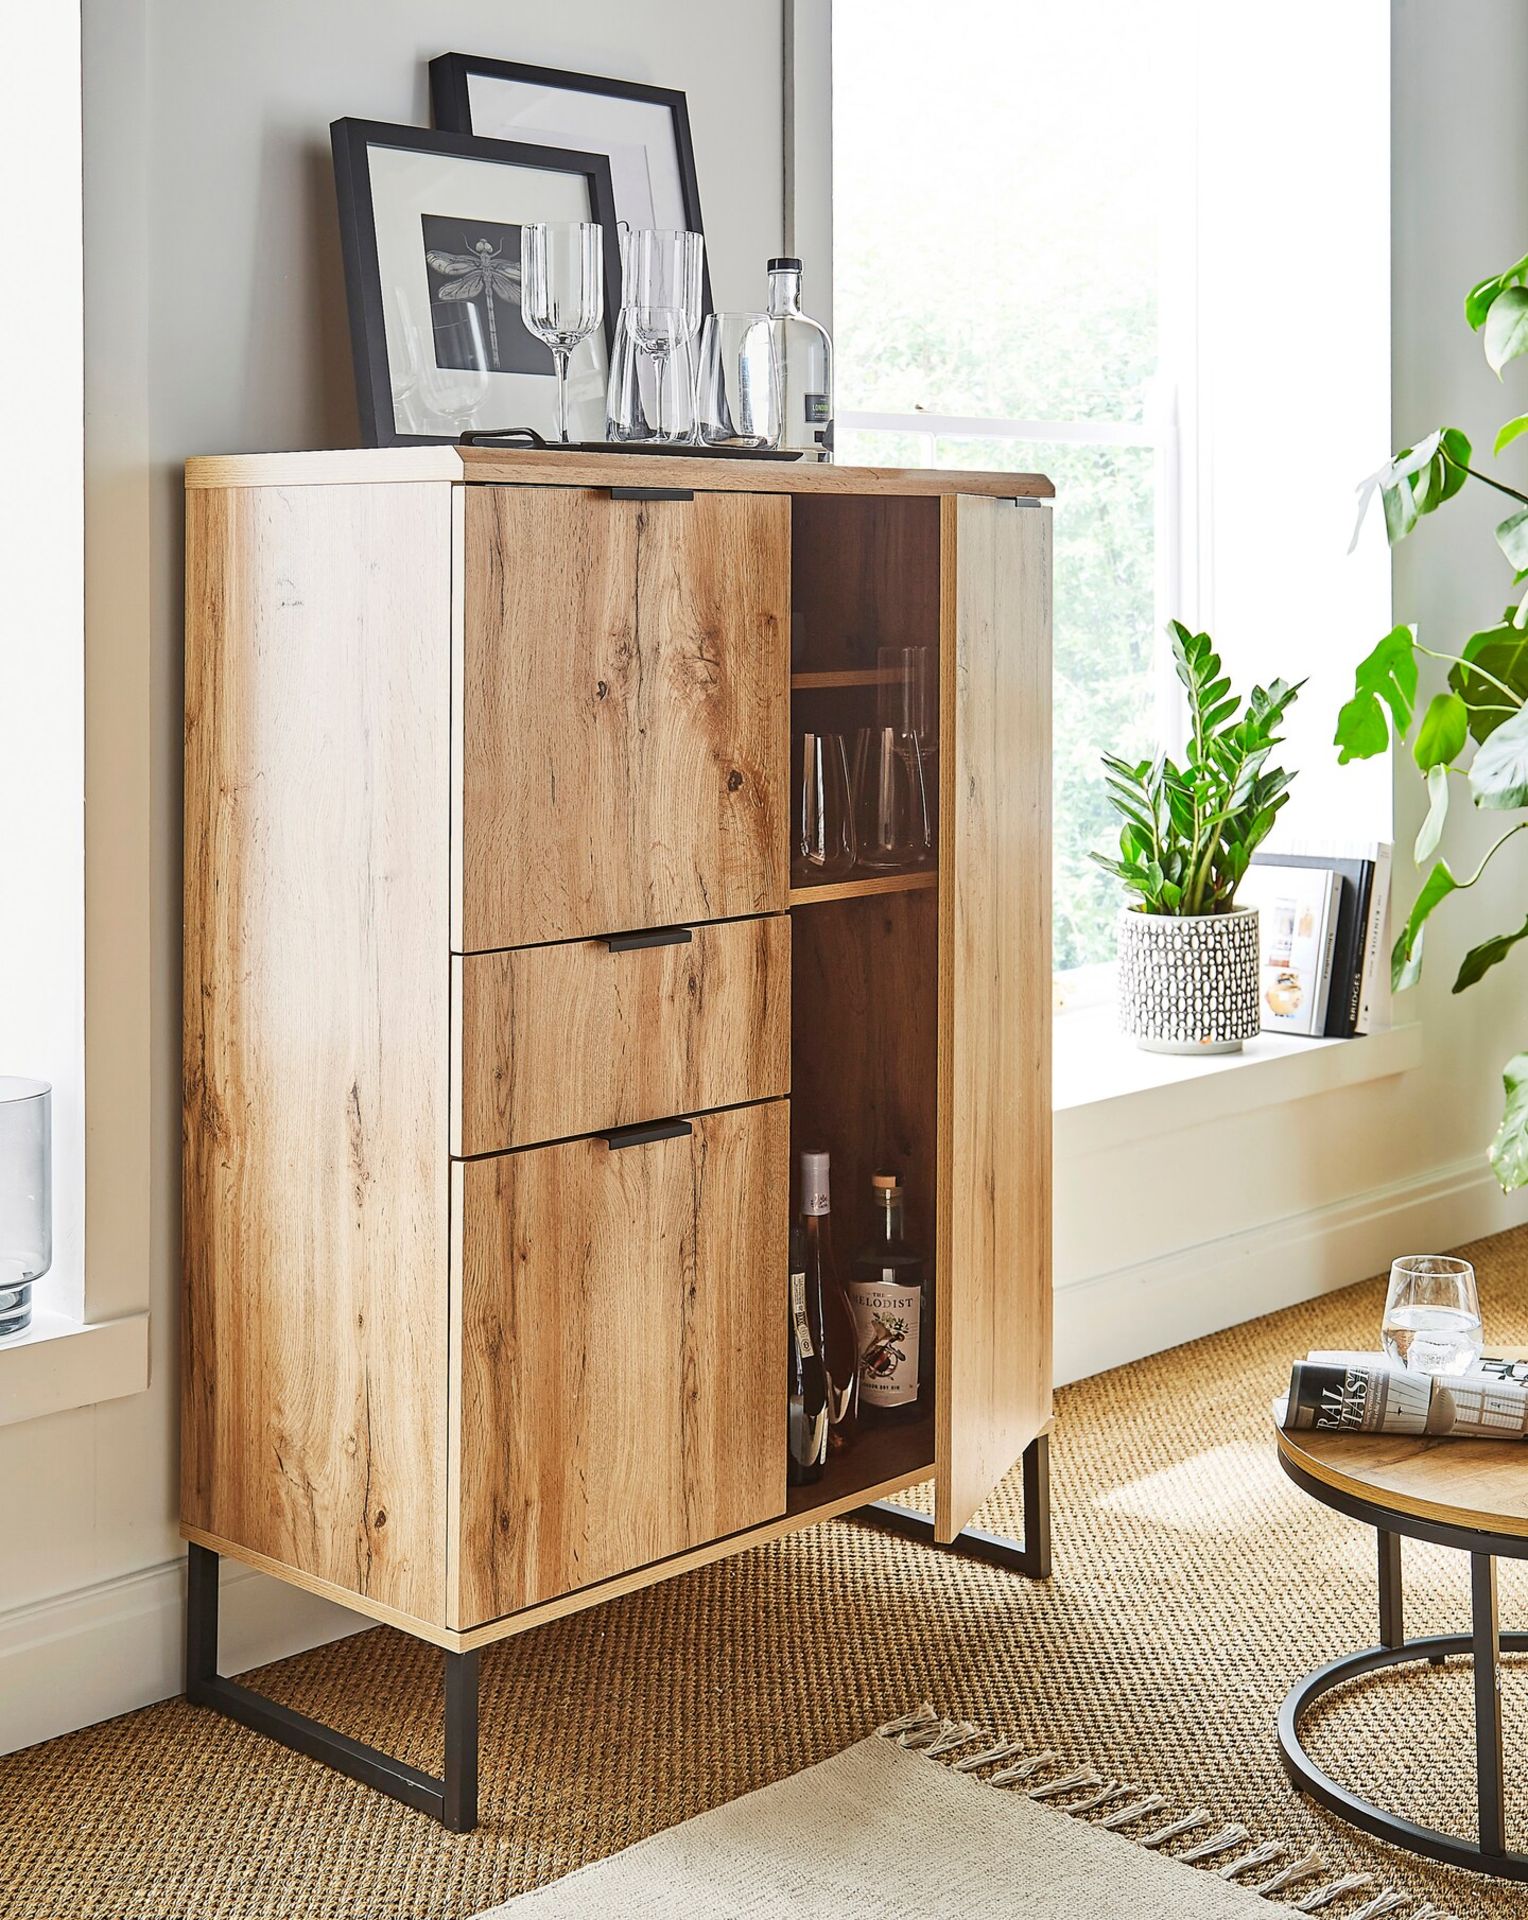 BRAND NEW SHOREDITCH Drinks Cabinet. OAK. RRP £299. The Shoreditch Range is a contemporary and - Image 4 of 4